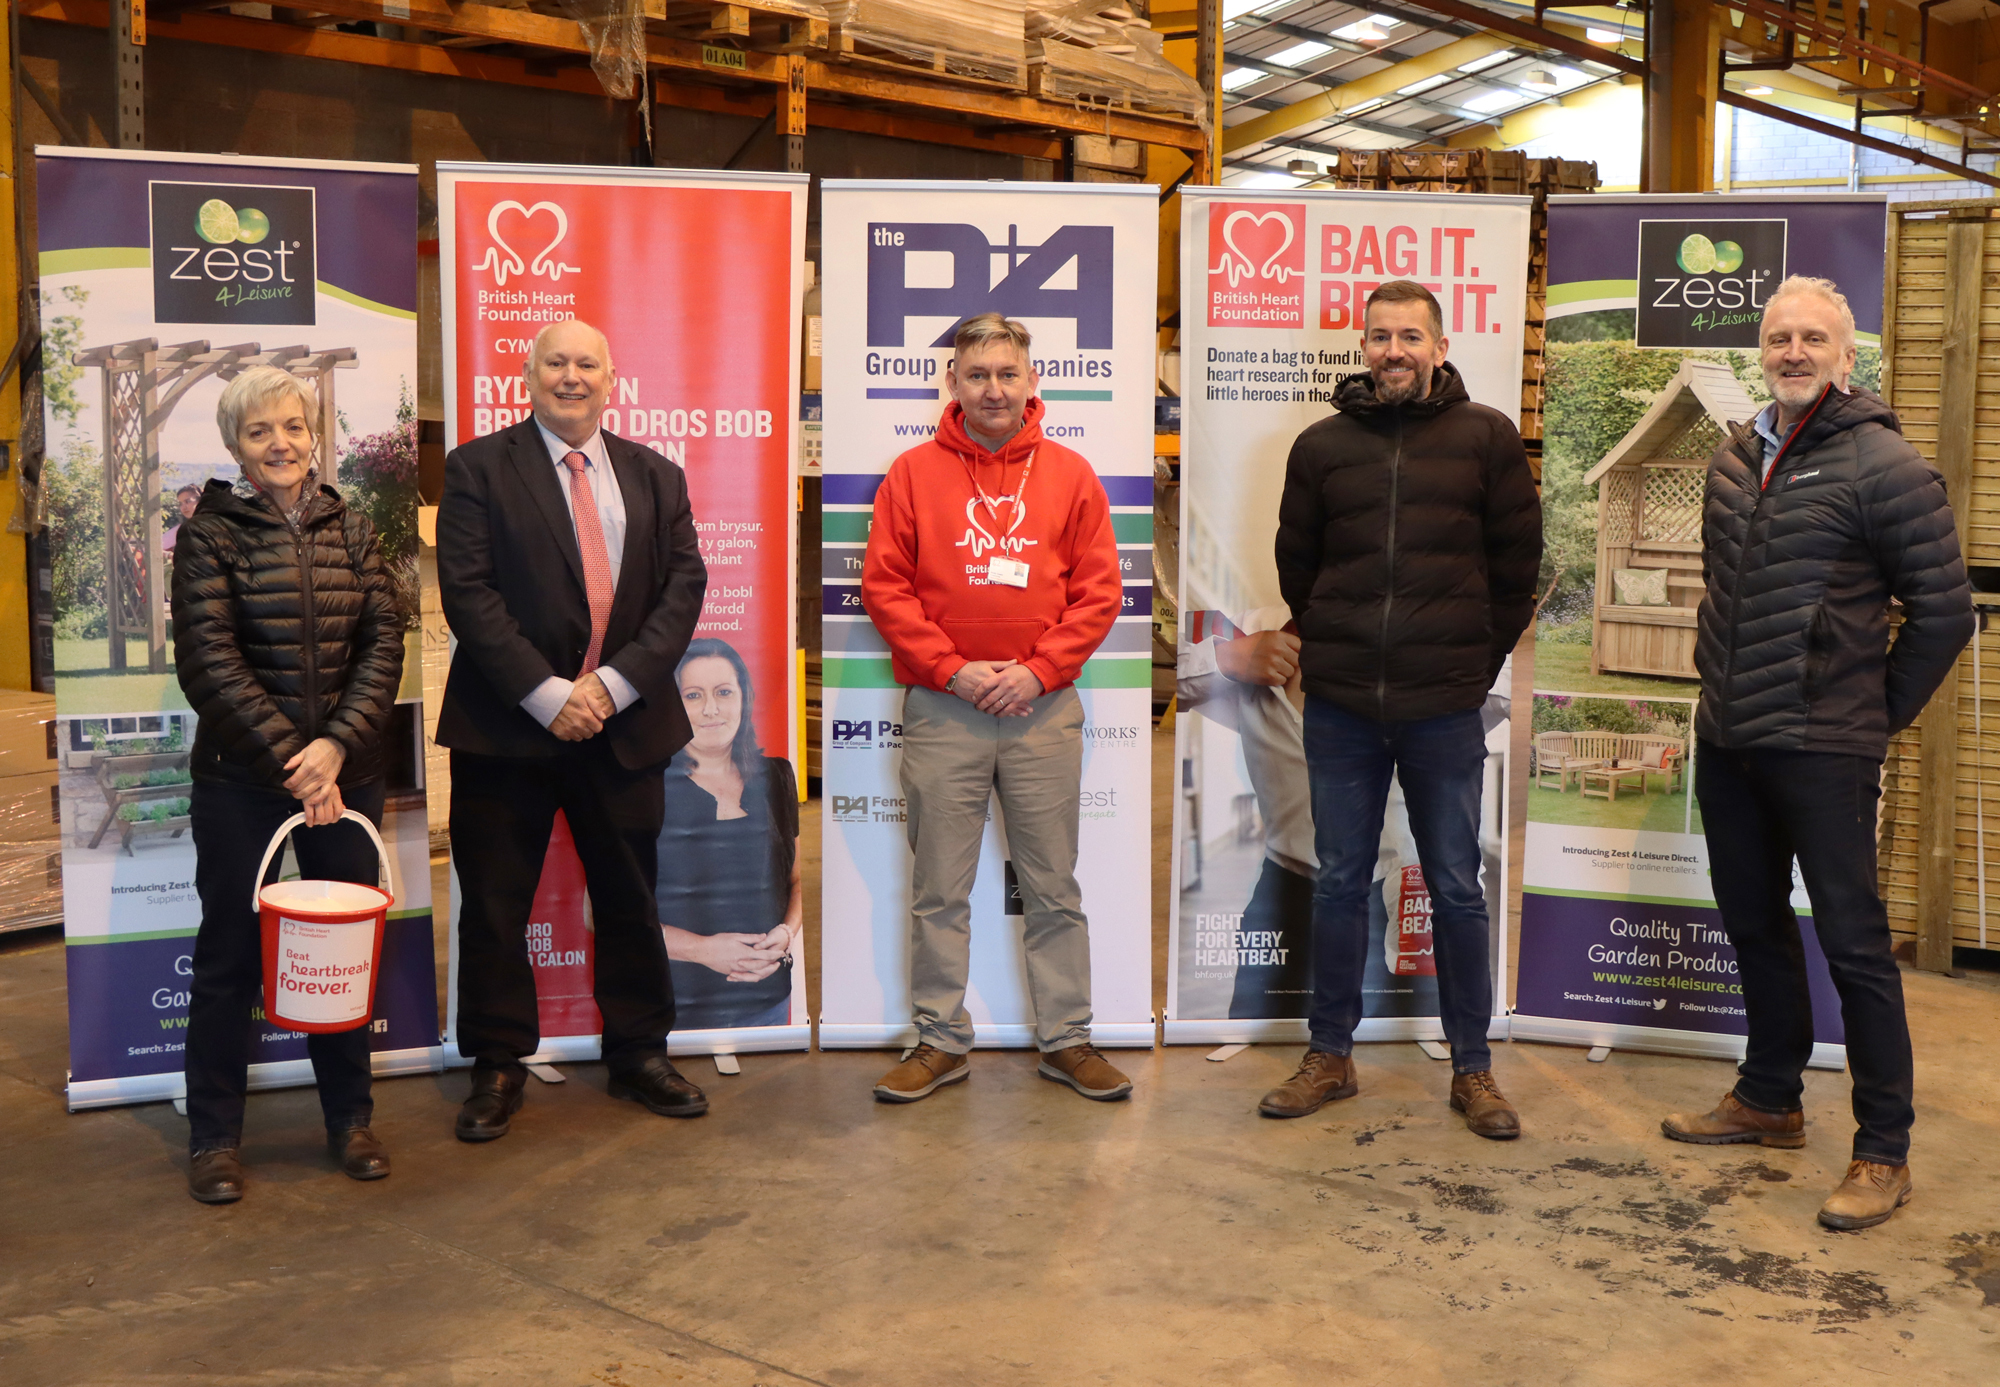 From left: Hazel Bainbridge, HR director, Paul Booth, operations director, Andrew Green, British Heart Foundation fundraising manager for North Wales, Andrew Baker P&A Group financial director and Steve Morgan, P&A Group managing director